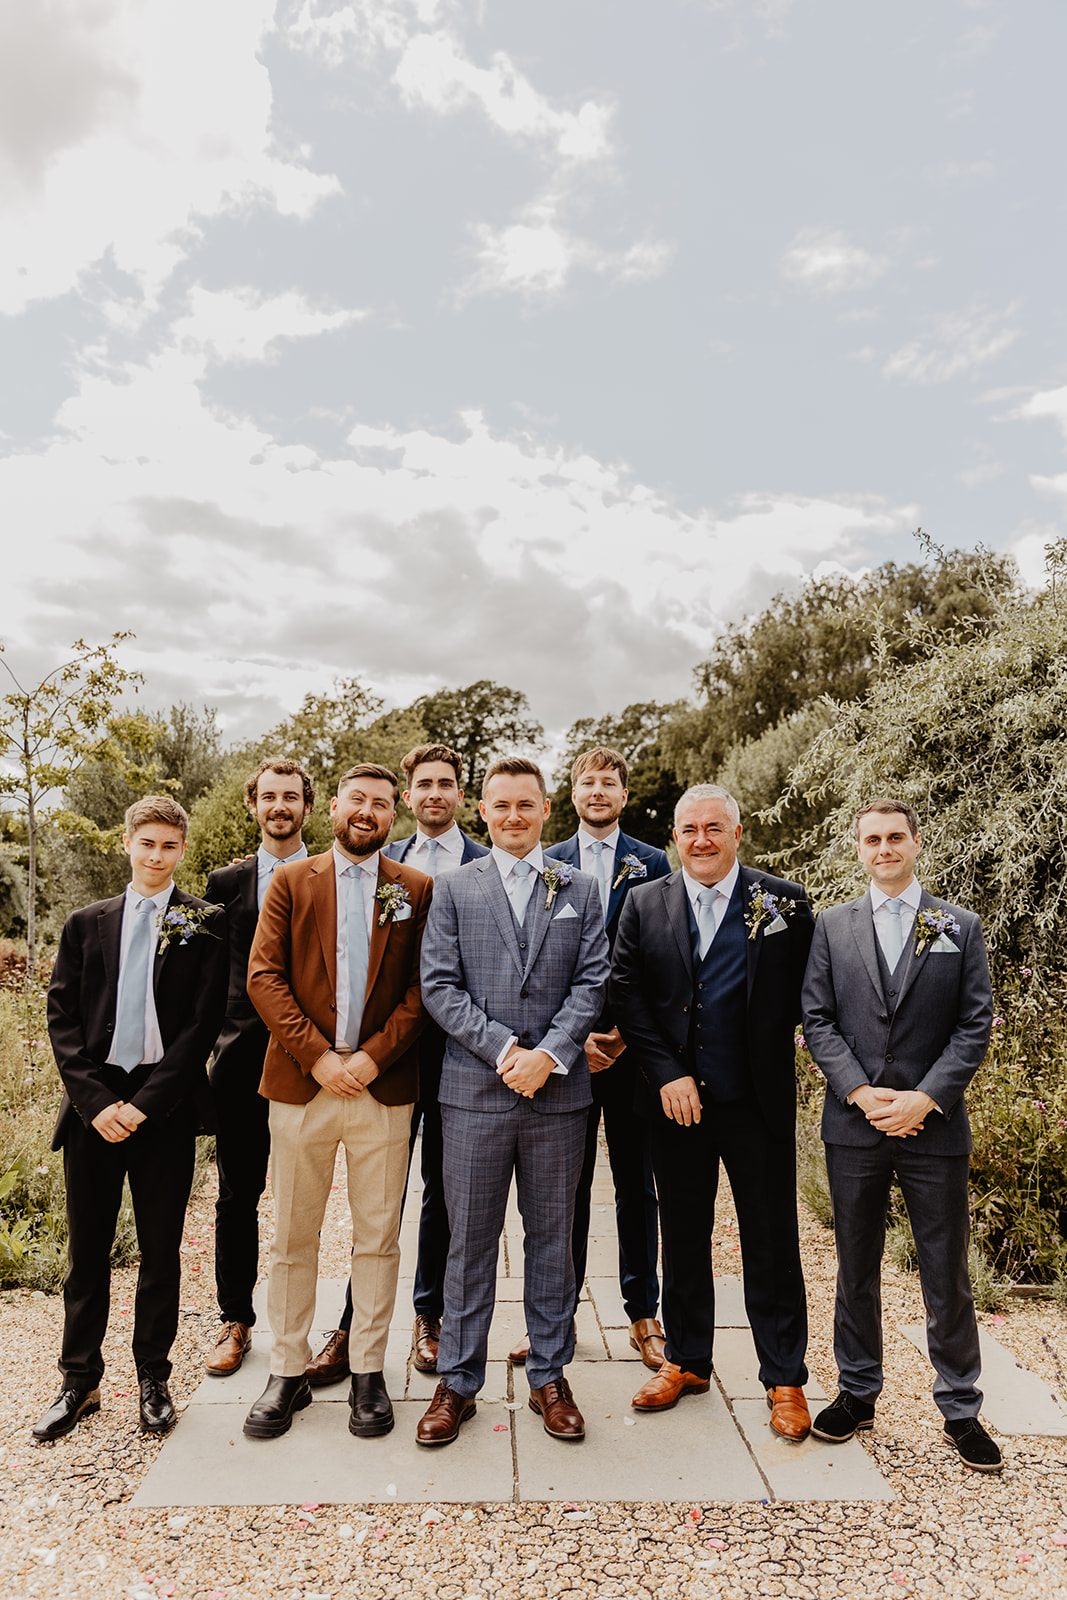 Groomsmen at Field Place Wedding Worthing, Sussex. By OliveJoy Photography.